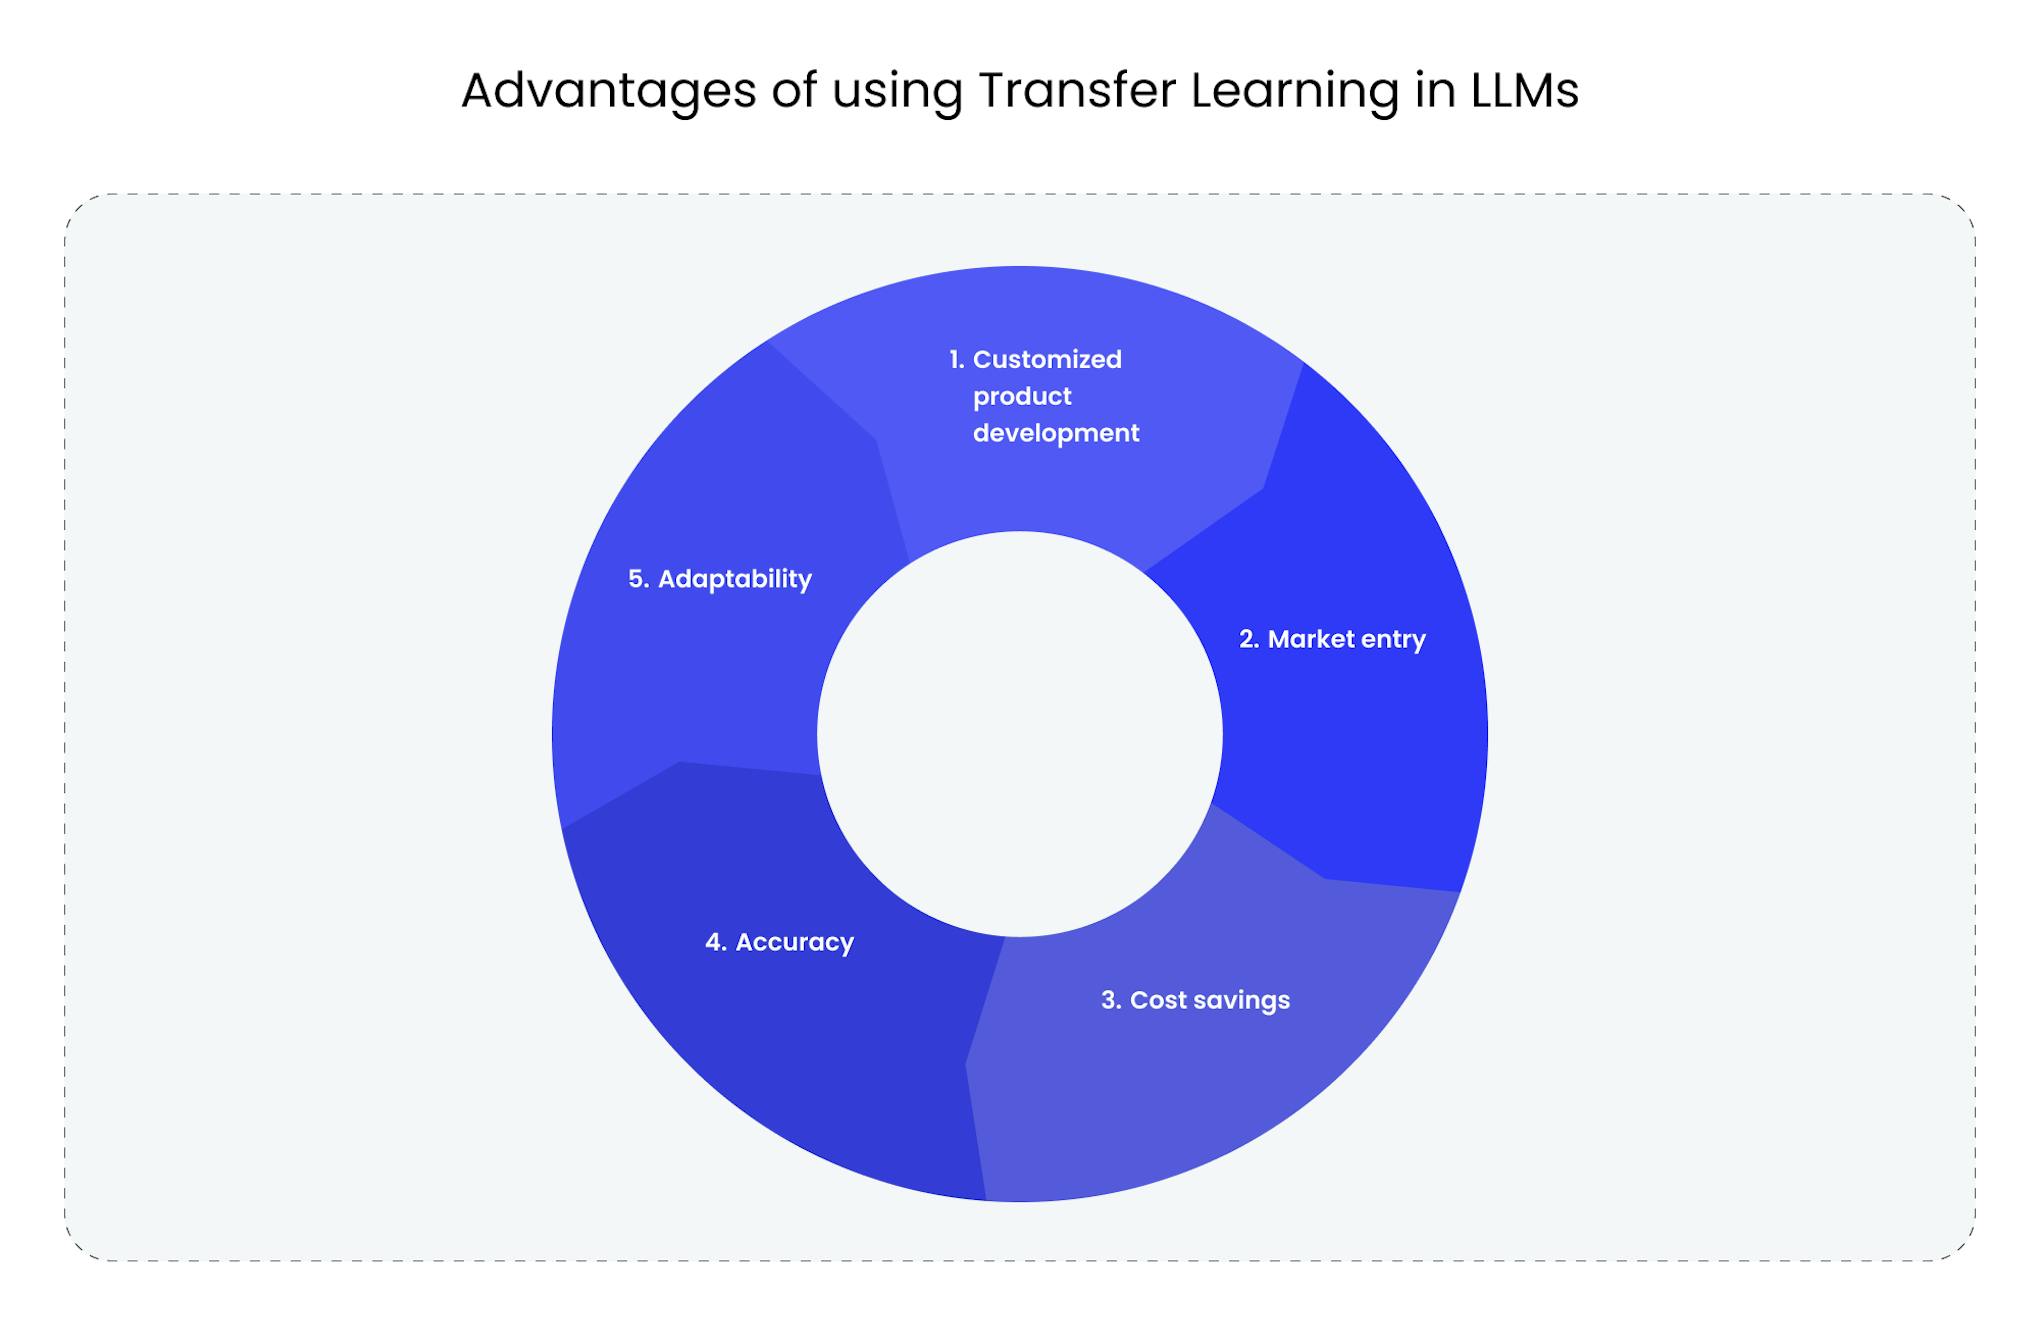 Advantages of using Transfer Learning in LLMs